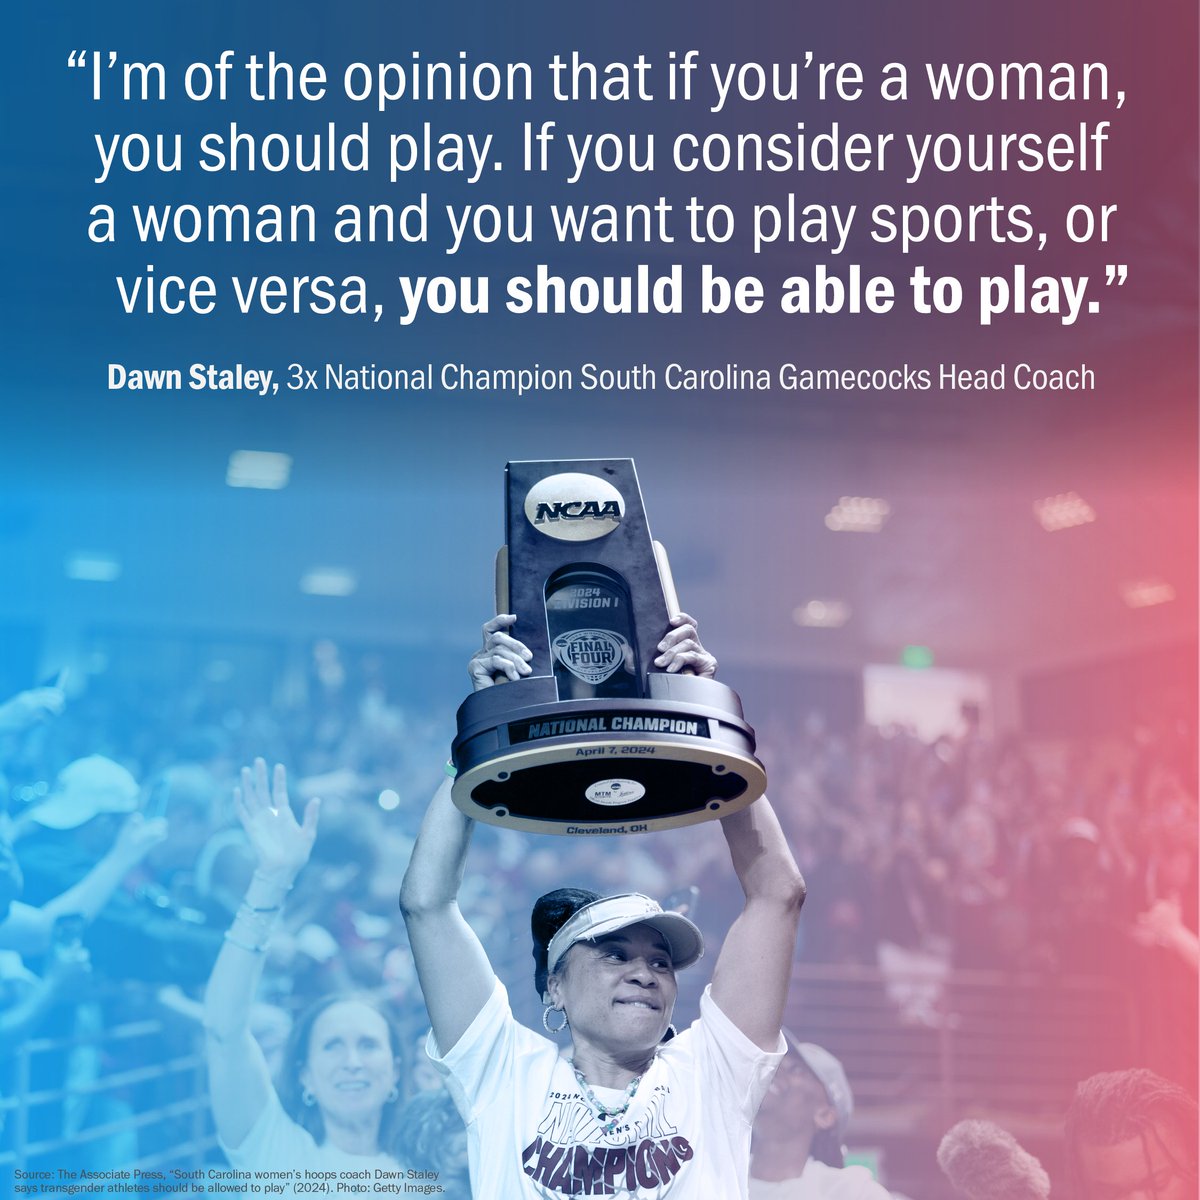 Thanks, Coach—for standing up for ALL women athletes.